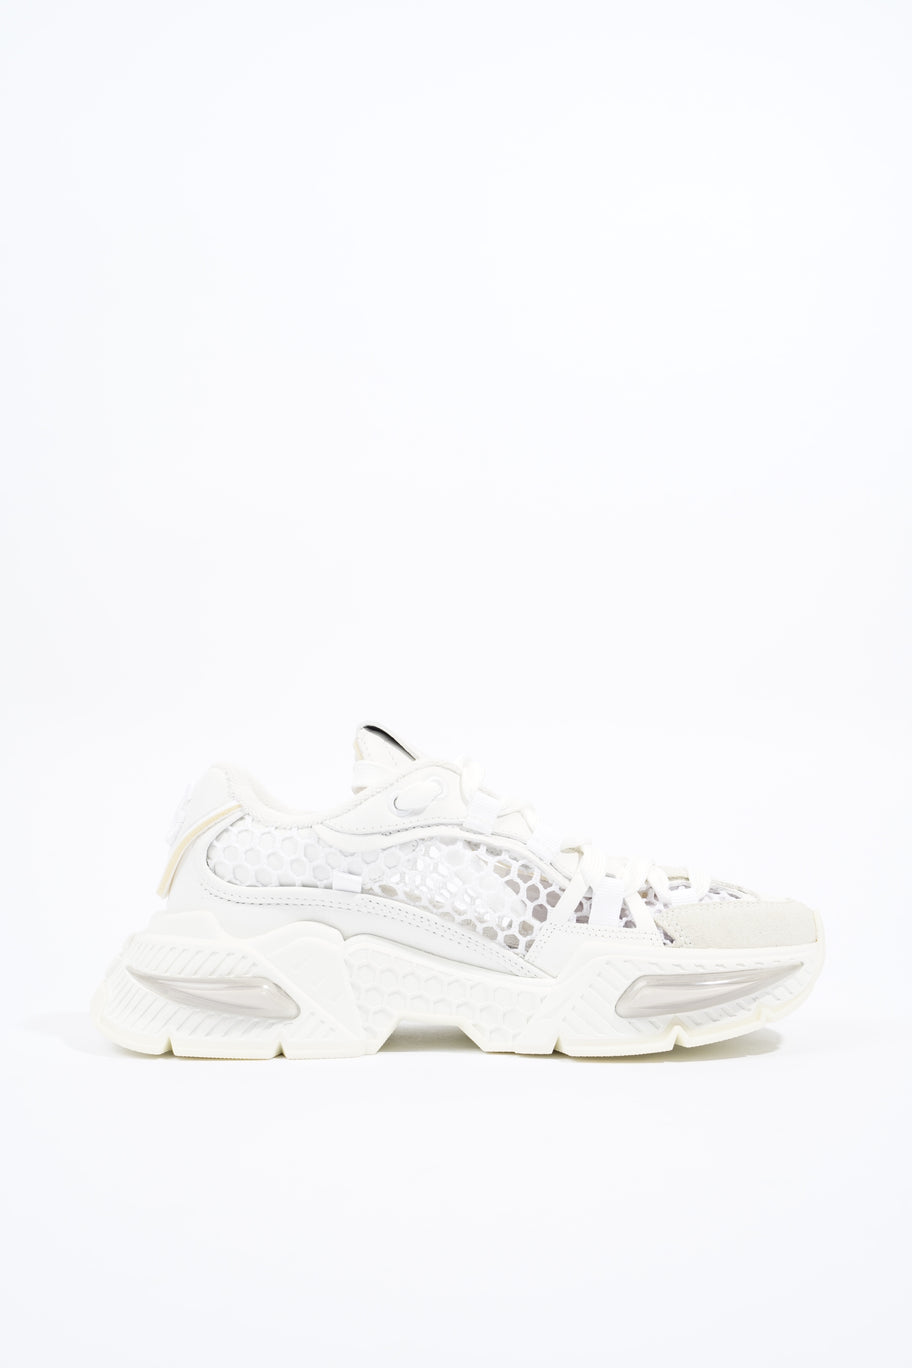 Airmaster Sneakers White Leather EU 37.5 UK 4.5 Image 4